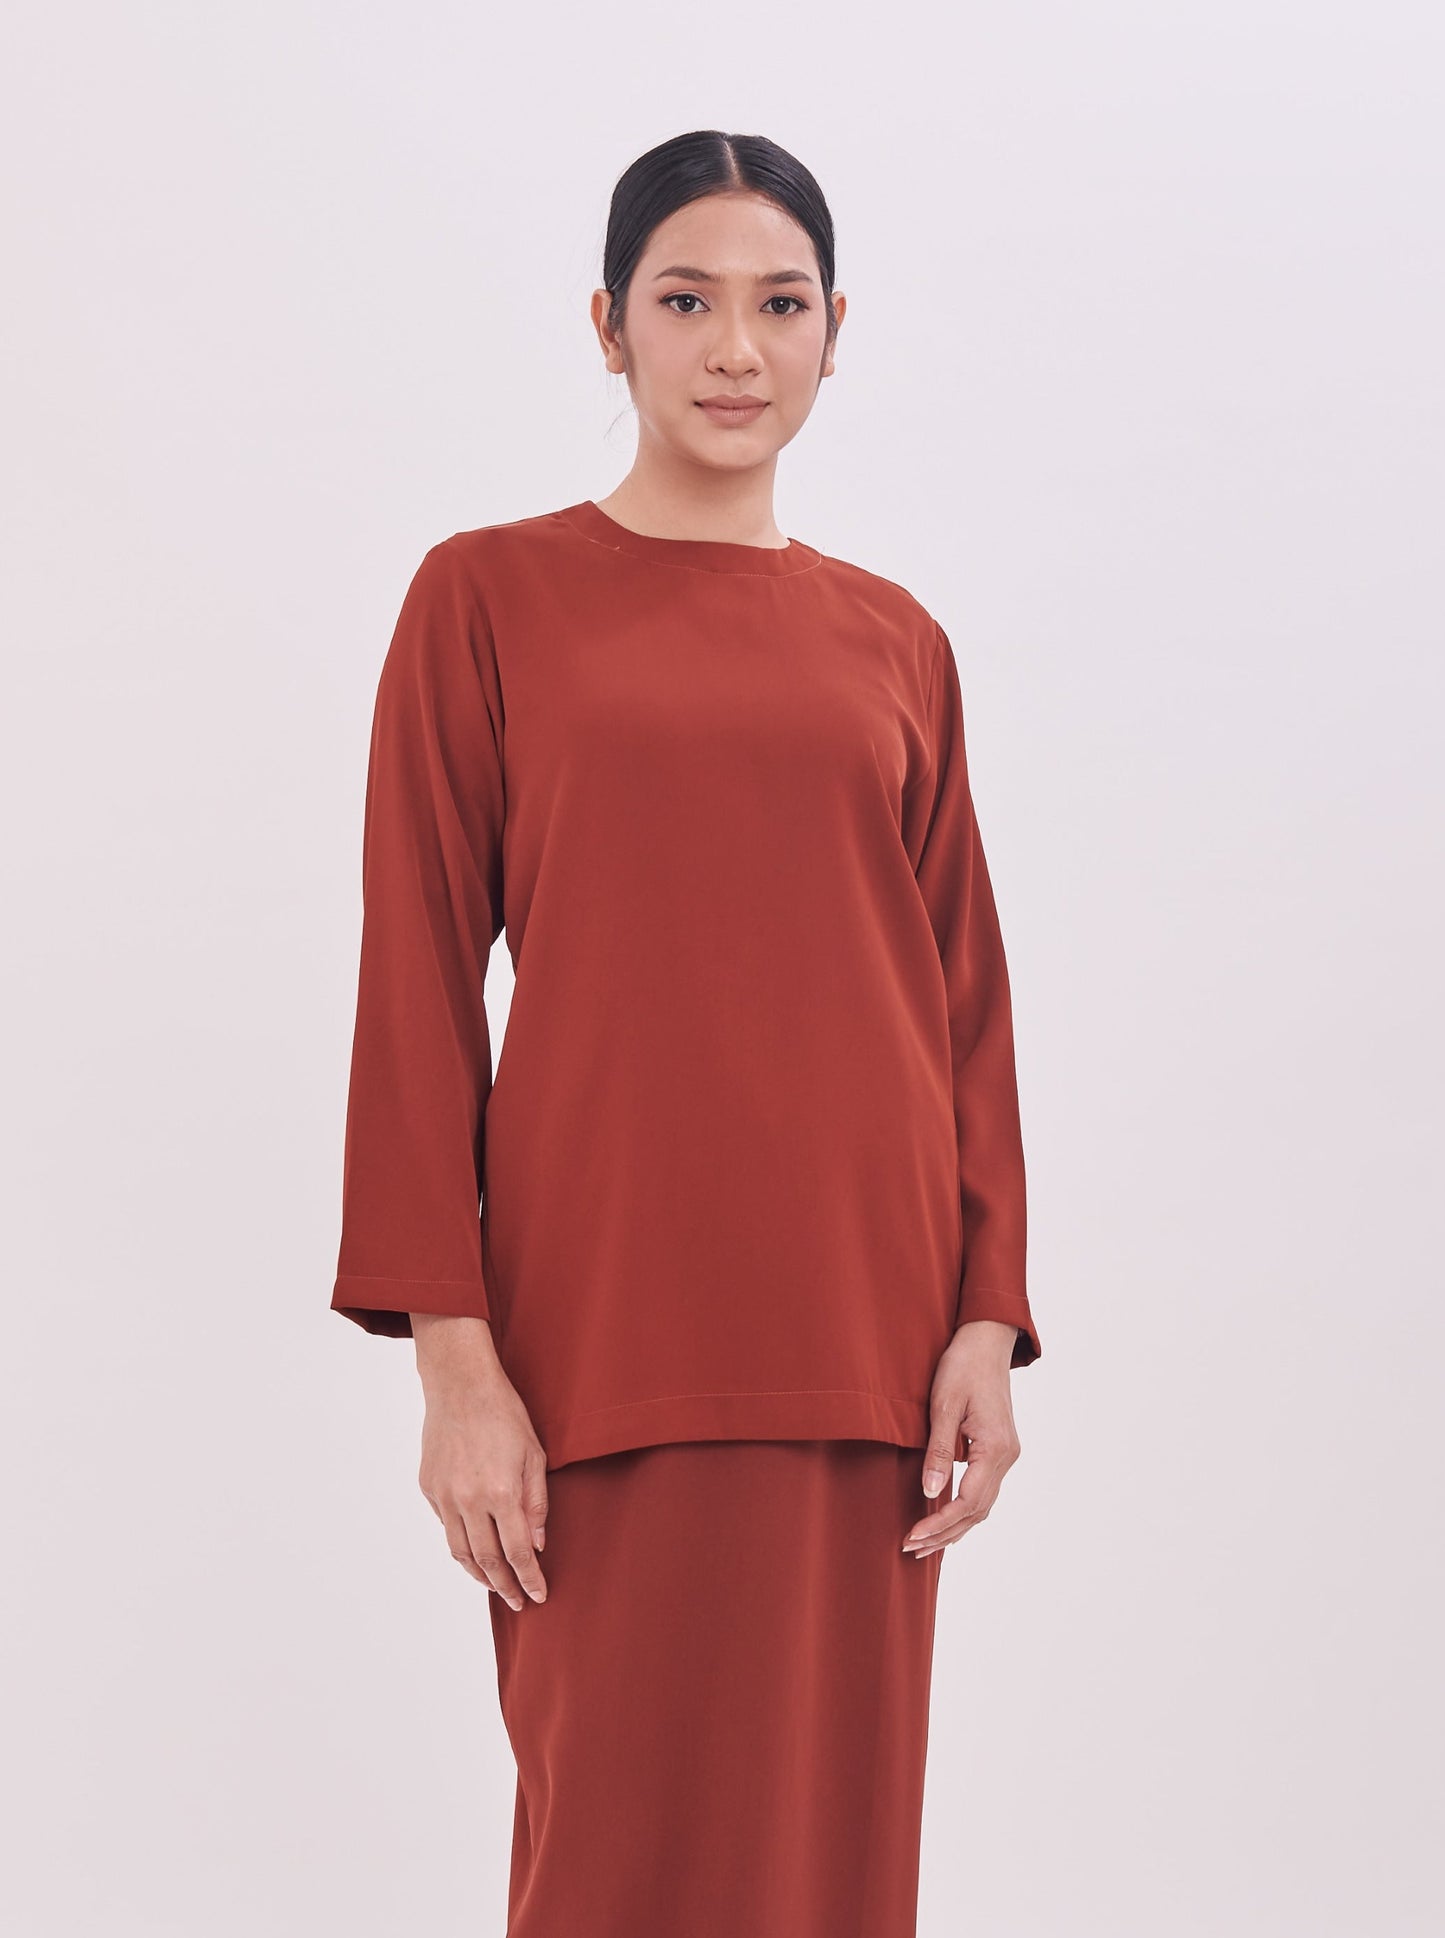 Edza Blouse in Brown